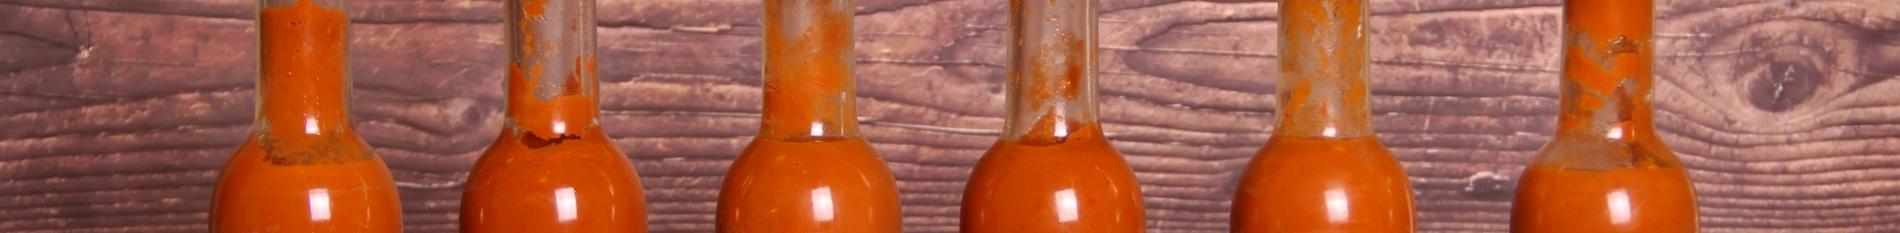 Blog-Banner-how-to-bottle-sauces-for-sale